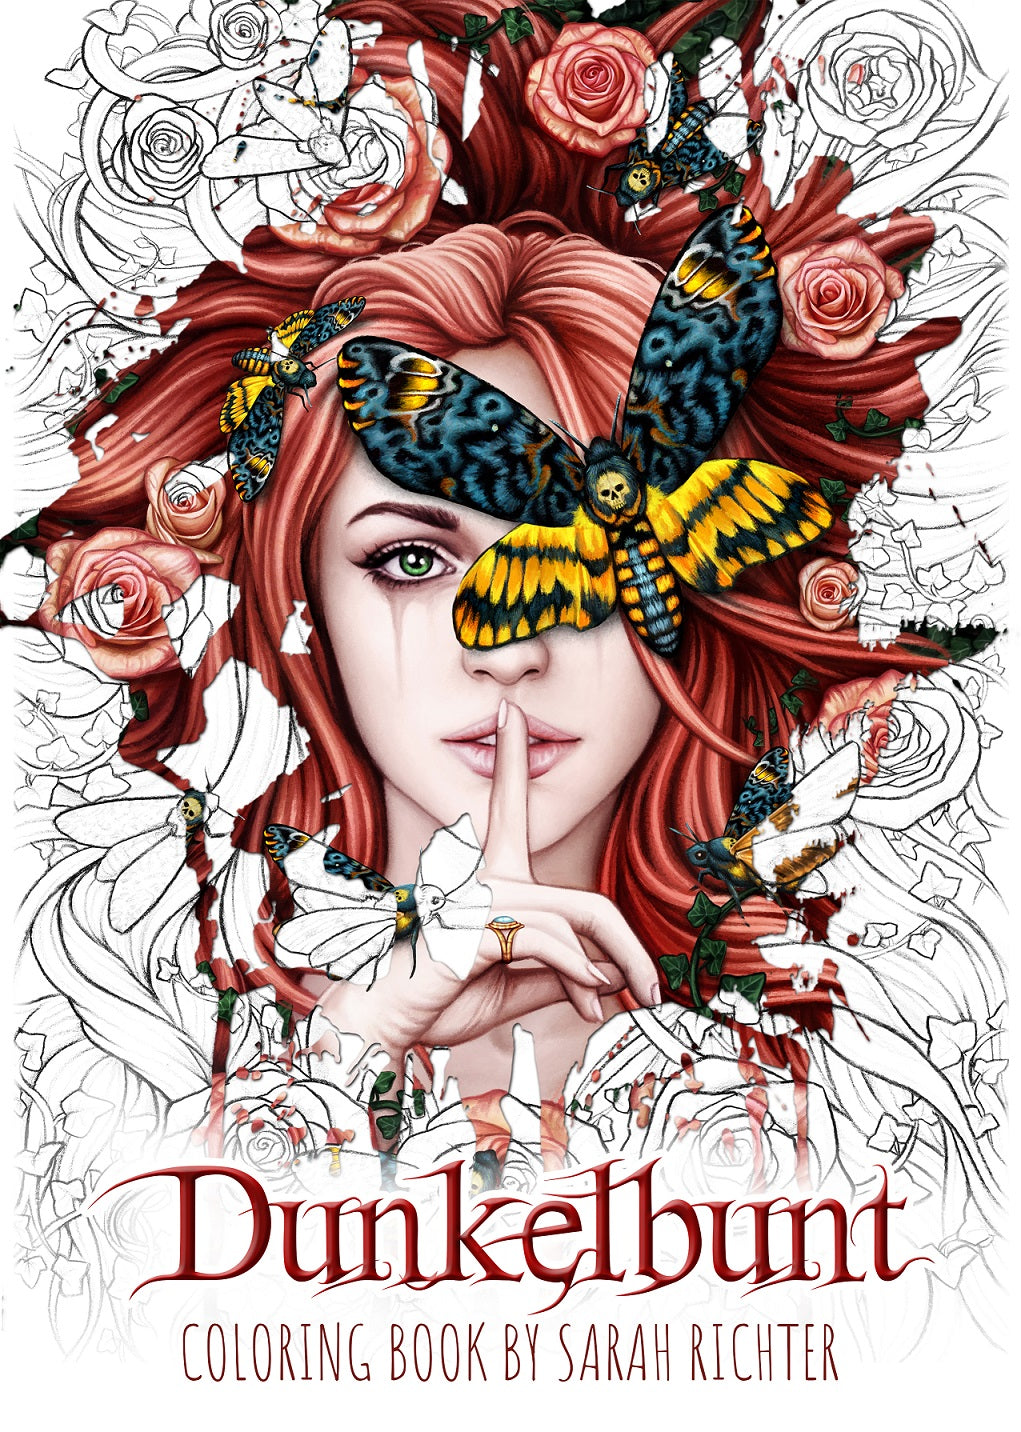 Dunkelbunt (Dark Colored) By Sarah Richter, Signed Coloring Book